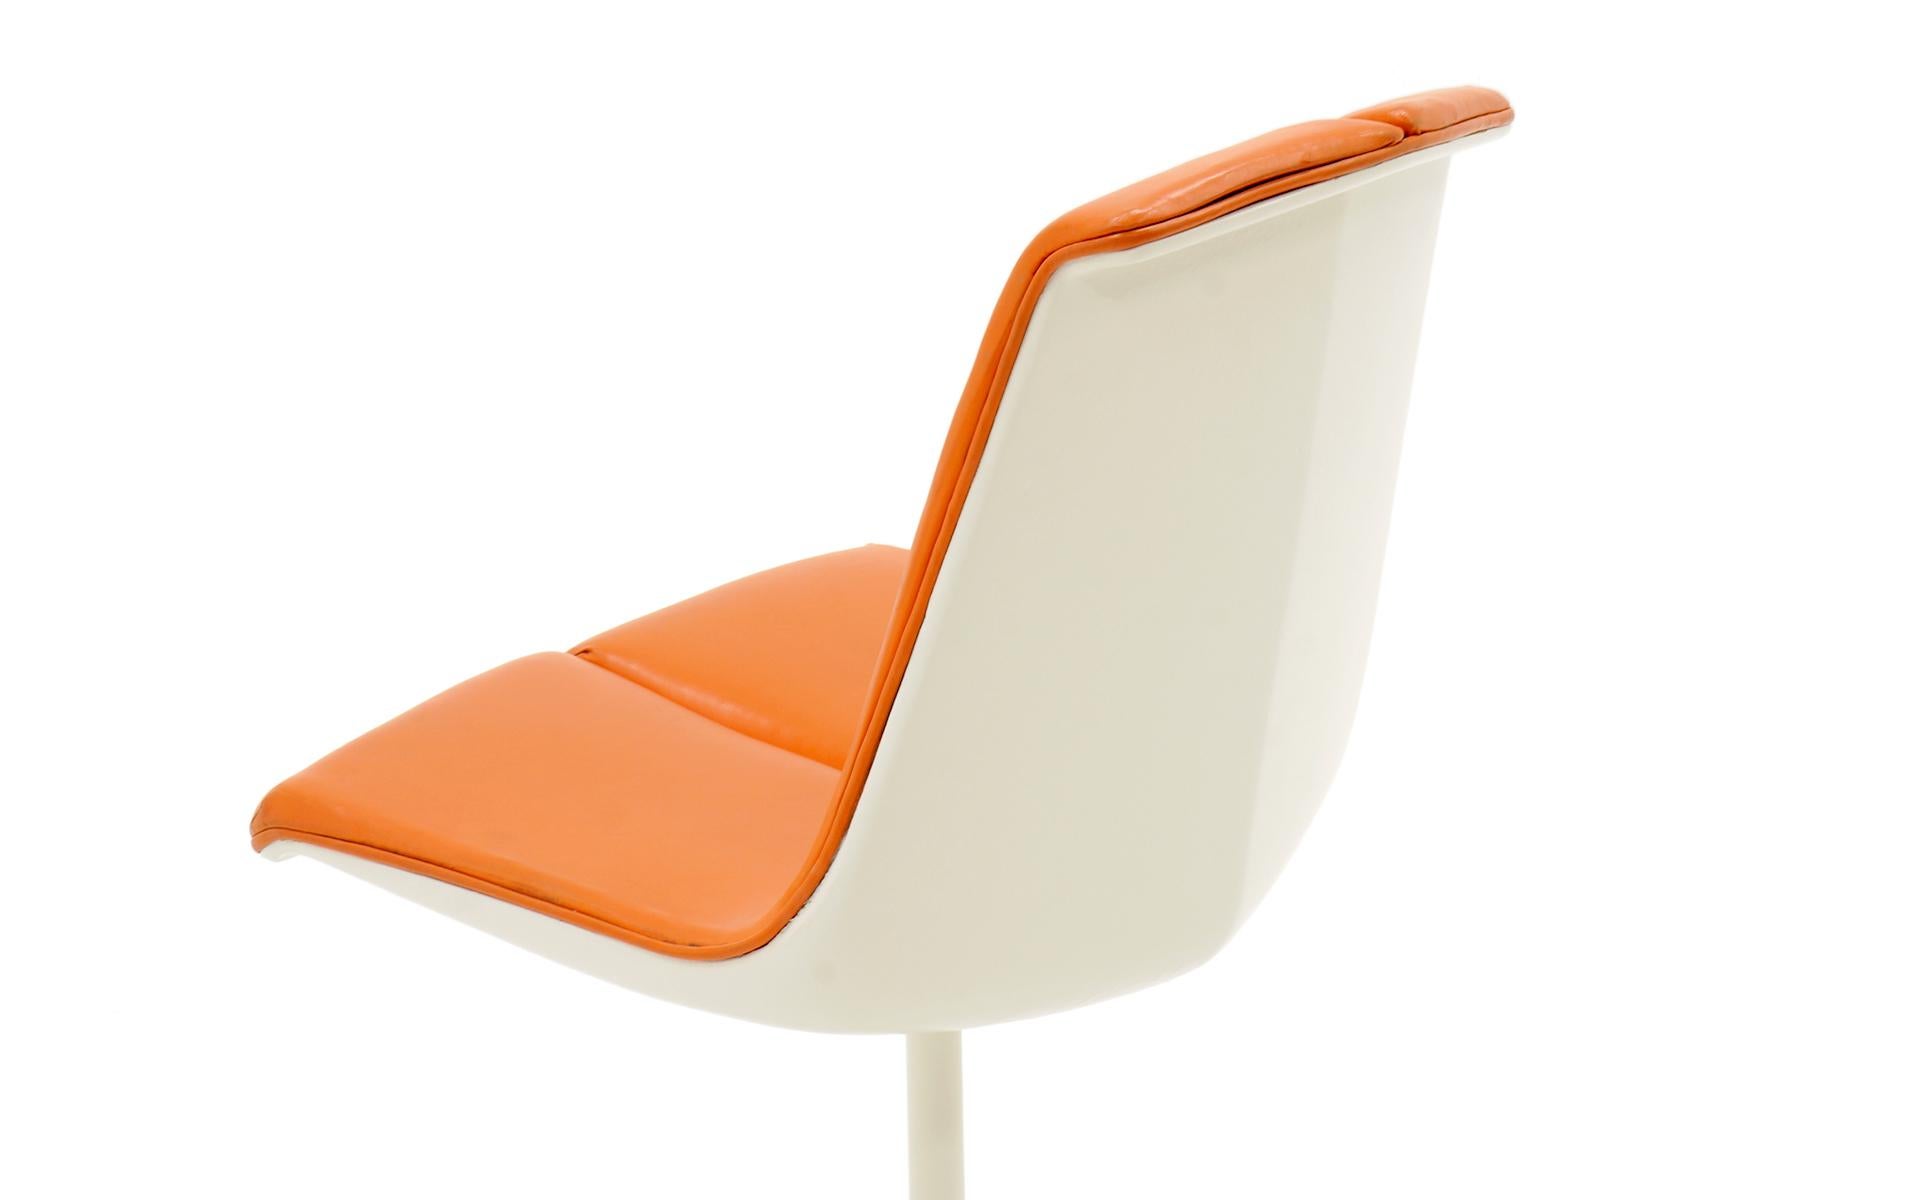 American Eight Dining Chairs by Richard Schultz for Knoll. White Frames, Red Orange Seats